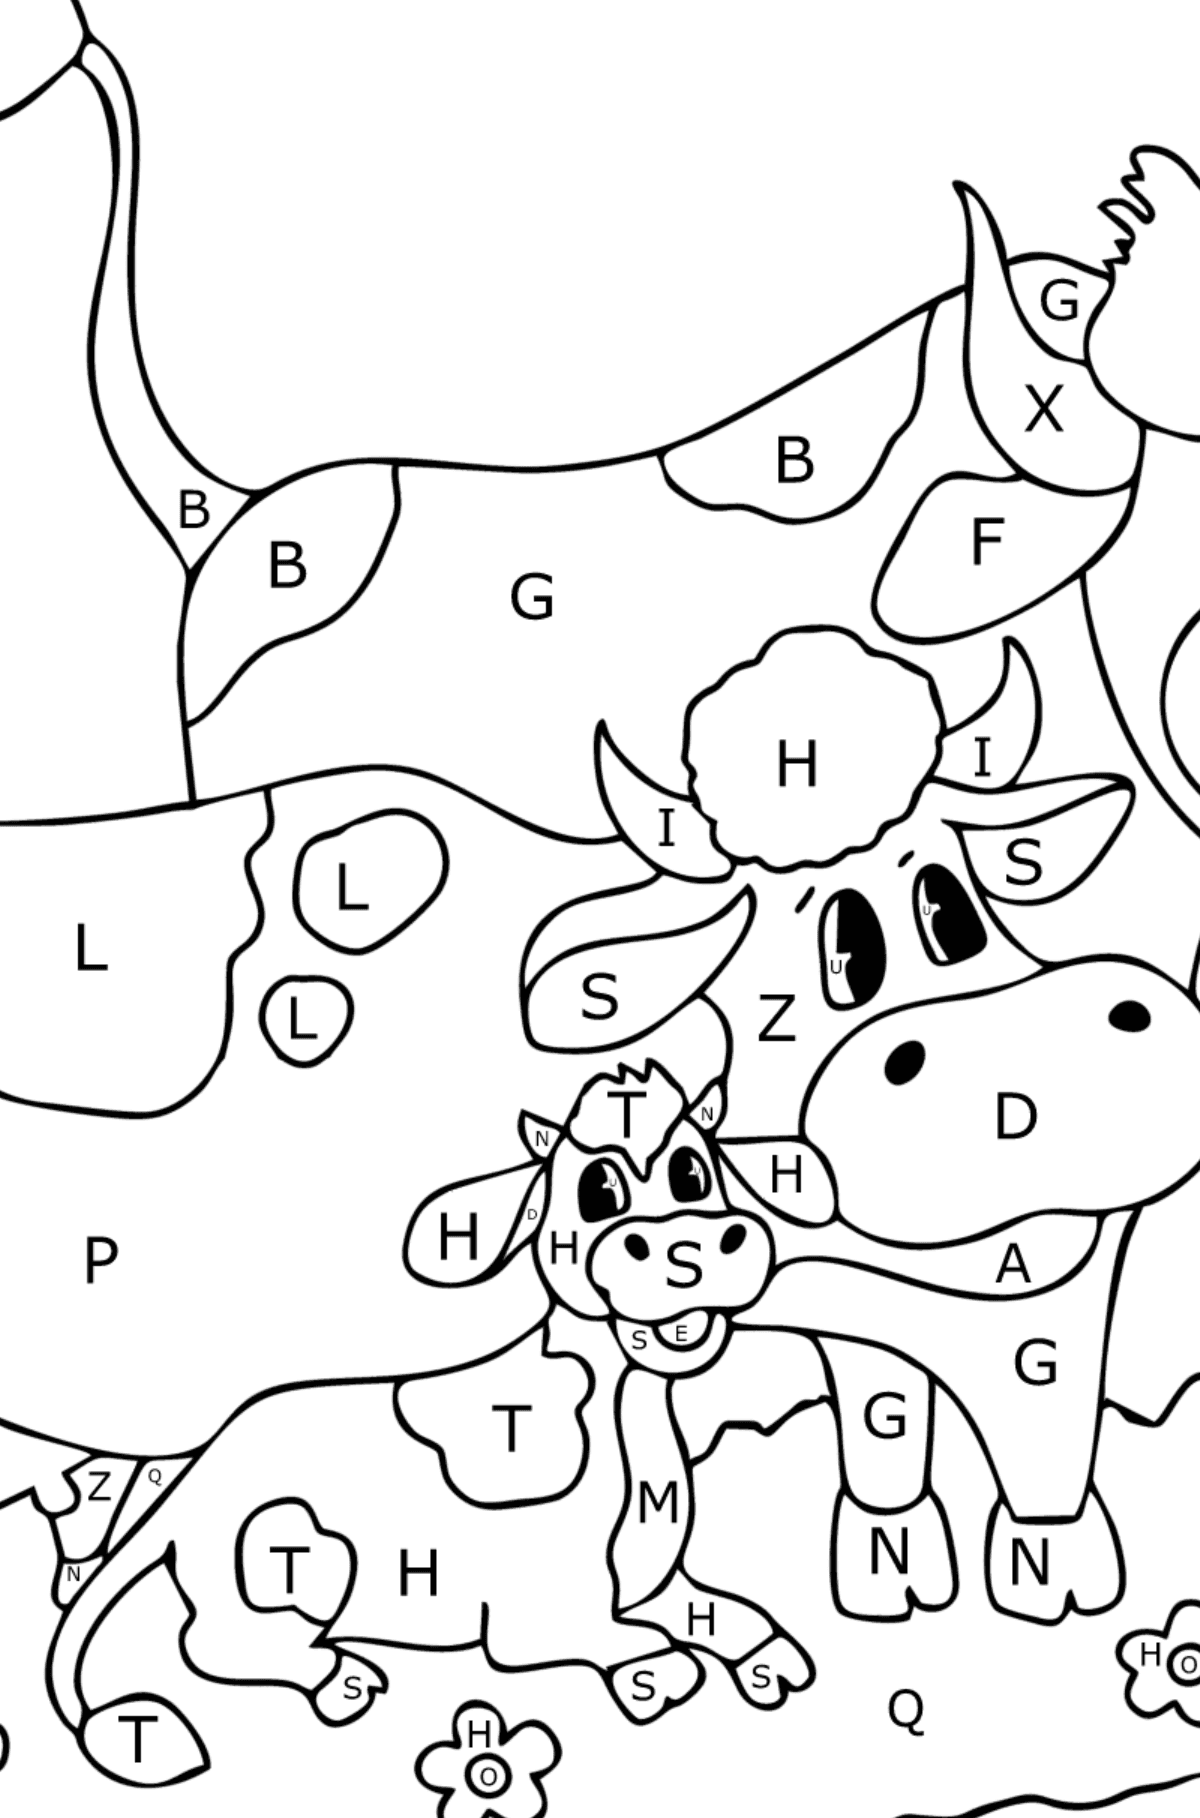 Cow, bull and calf coloring page - Coloring by Letters for Kids